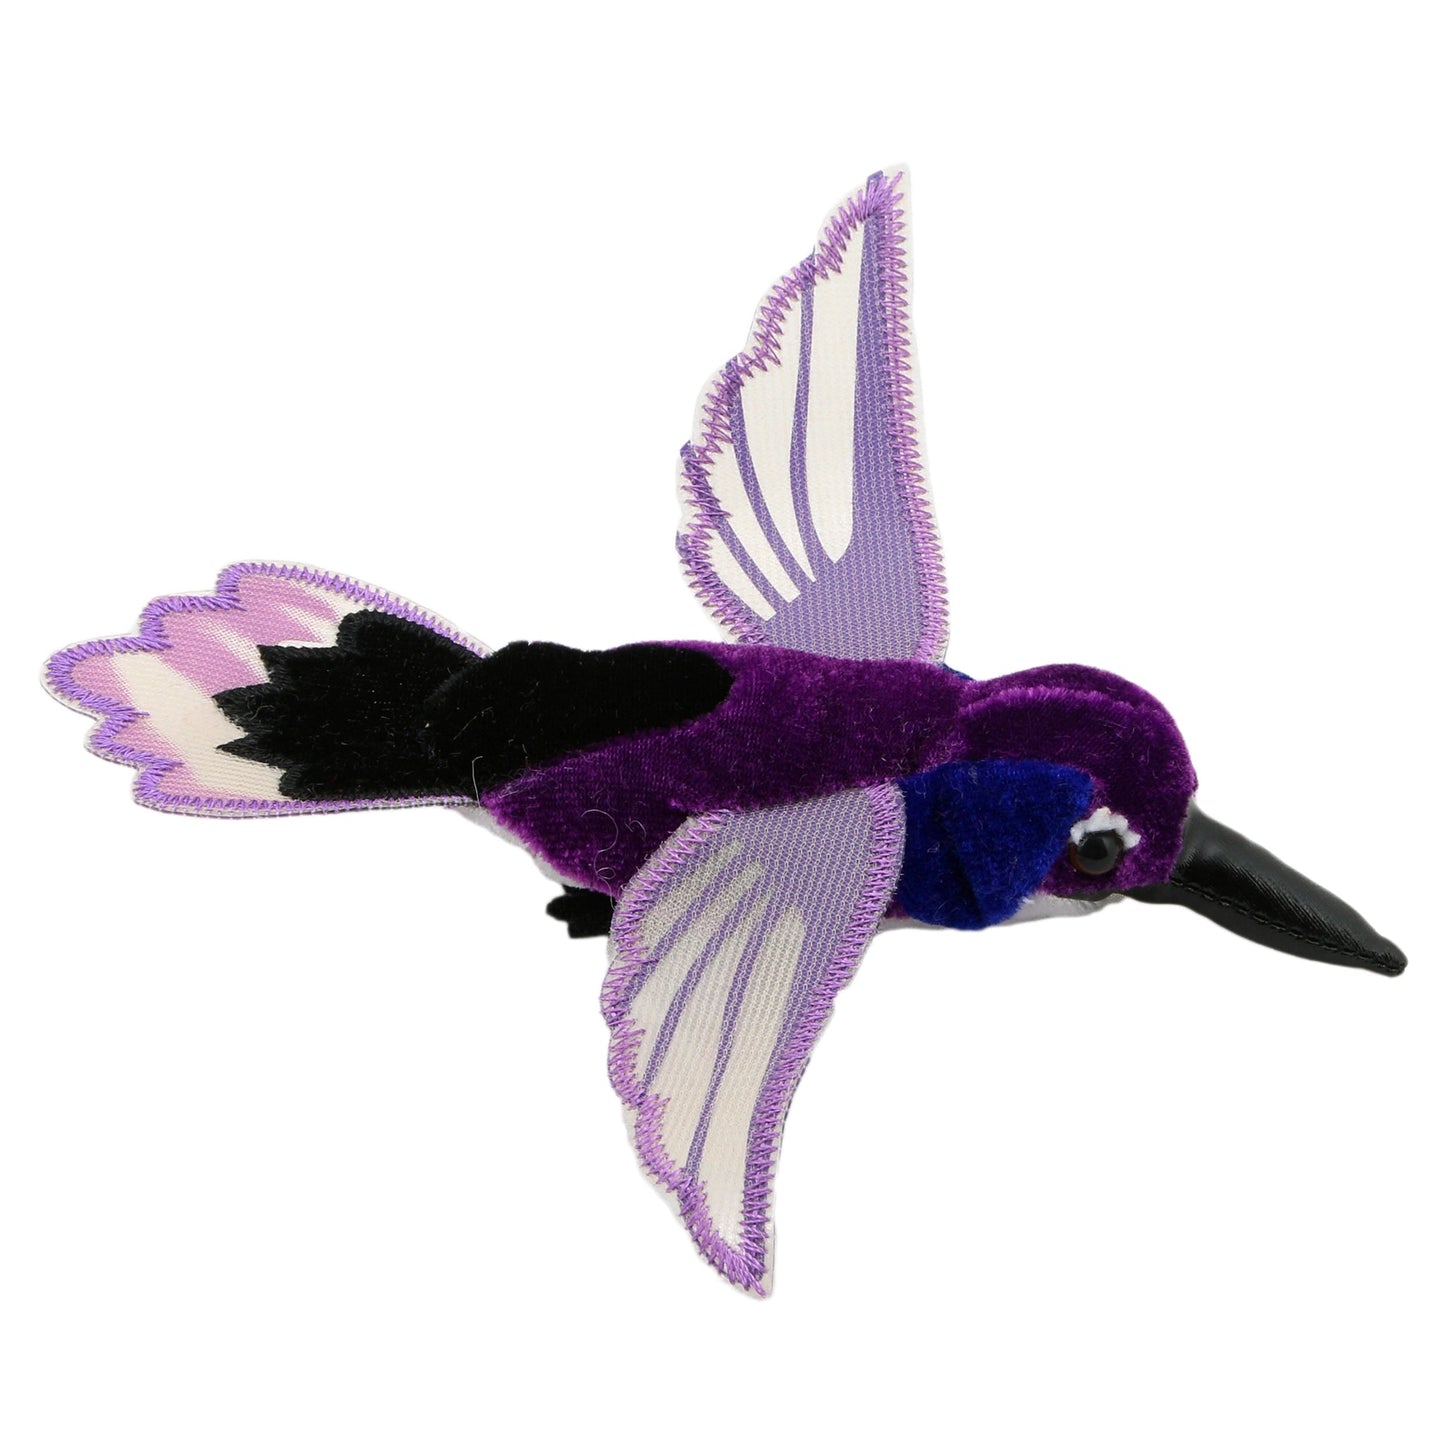 Hummingbird (Purple) Finger Puppet - The Puppet Company - The Forgotten Toy Shop